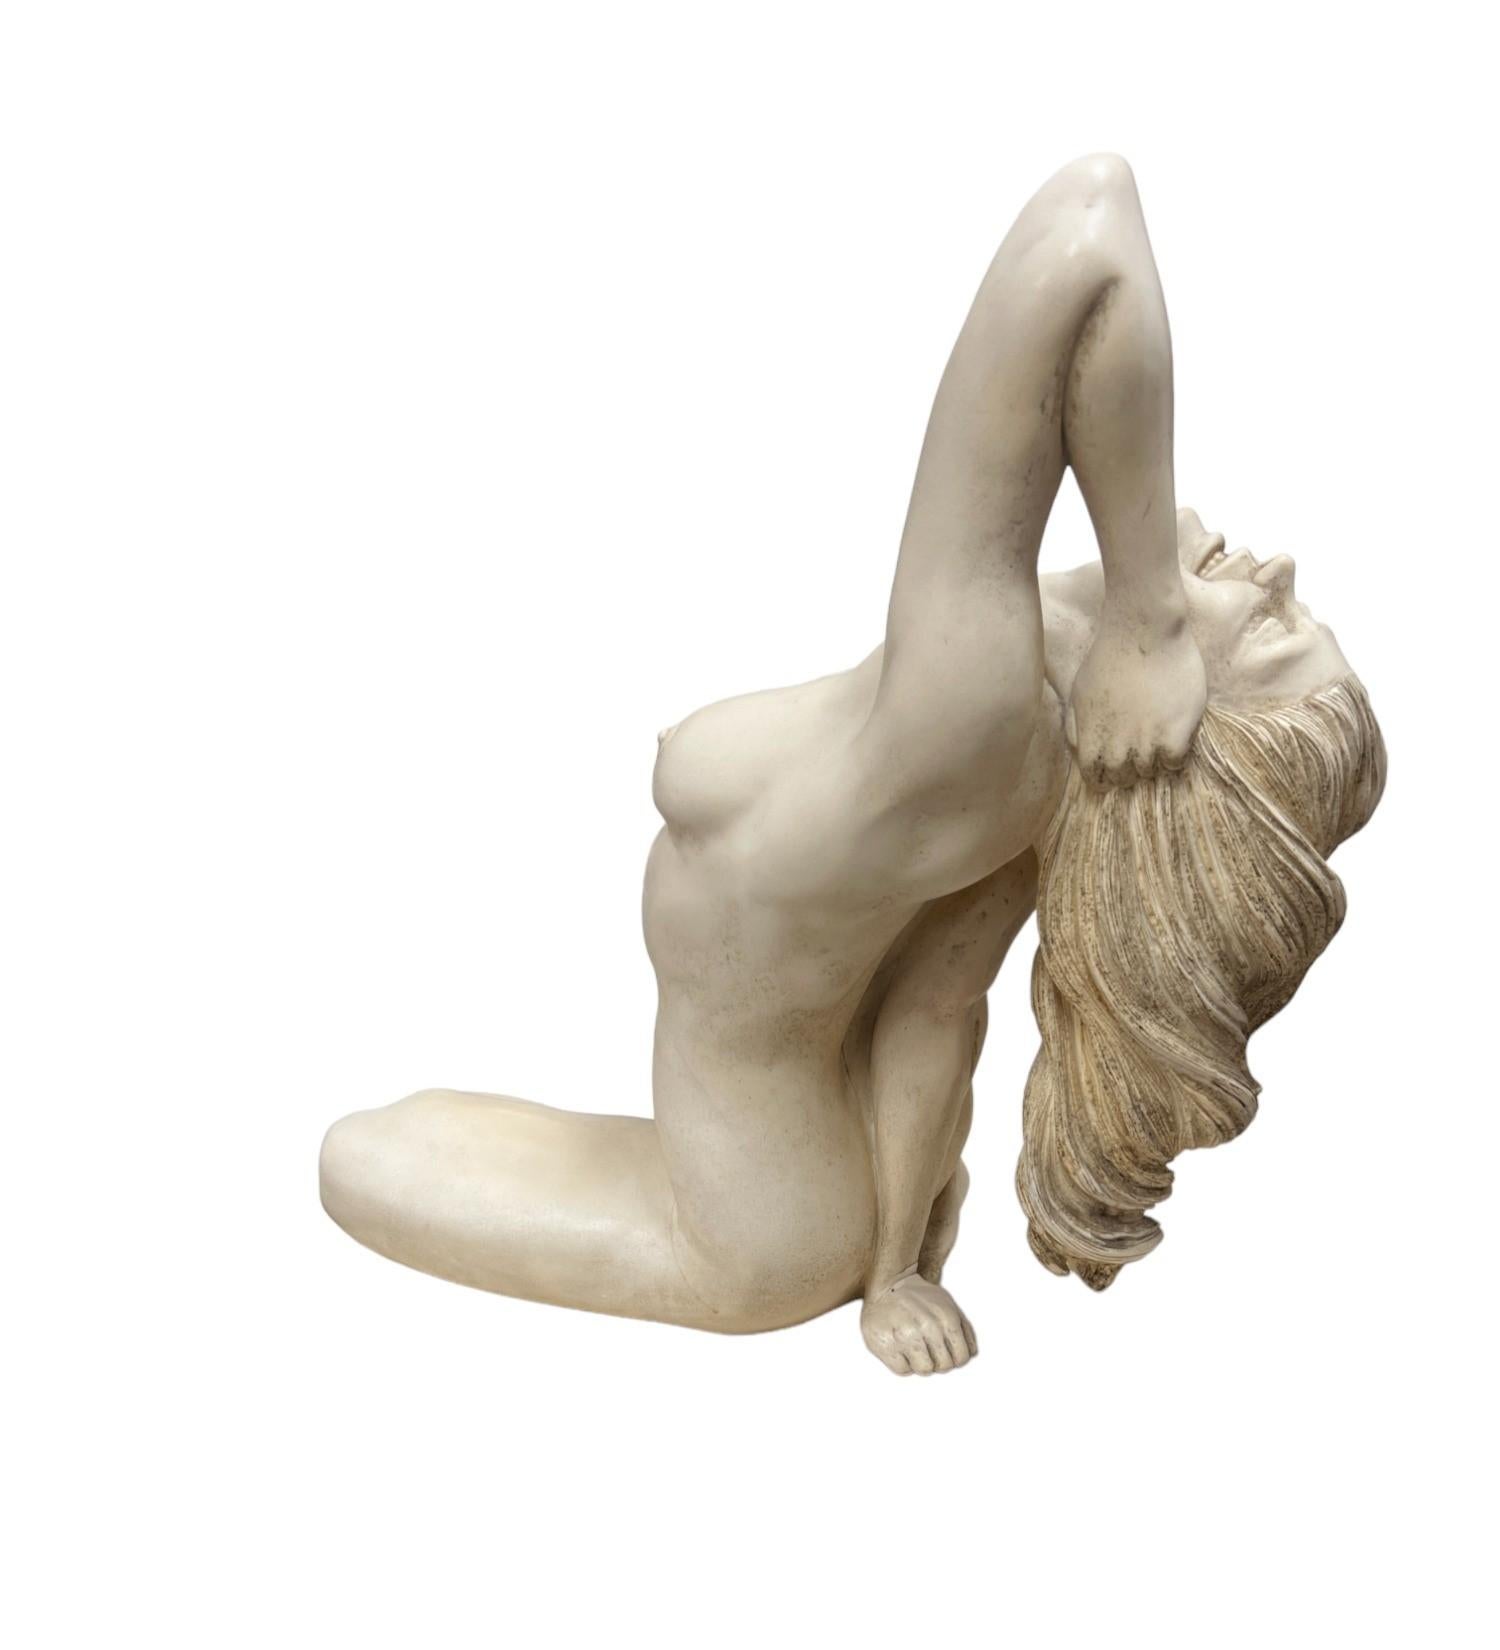 American Seated Reclining Nude Female Sculpture For Sale